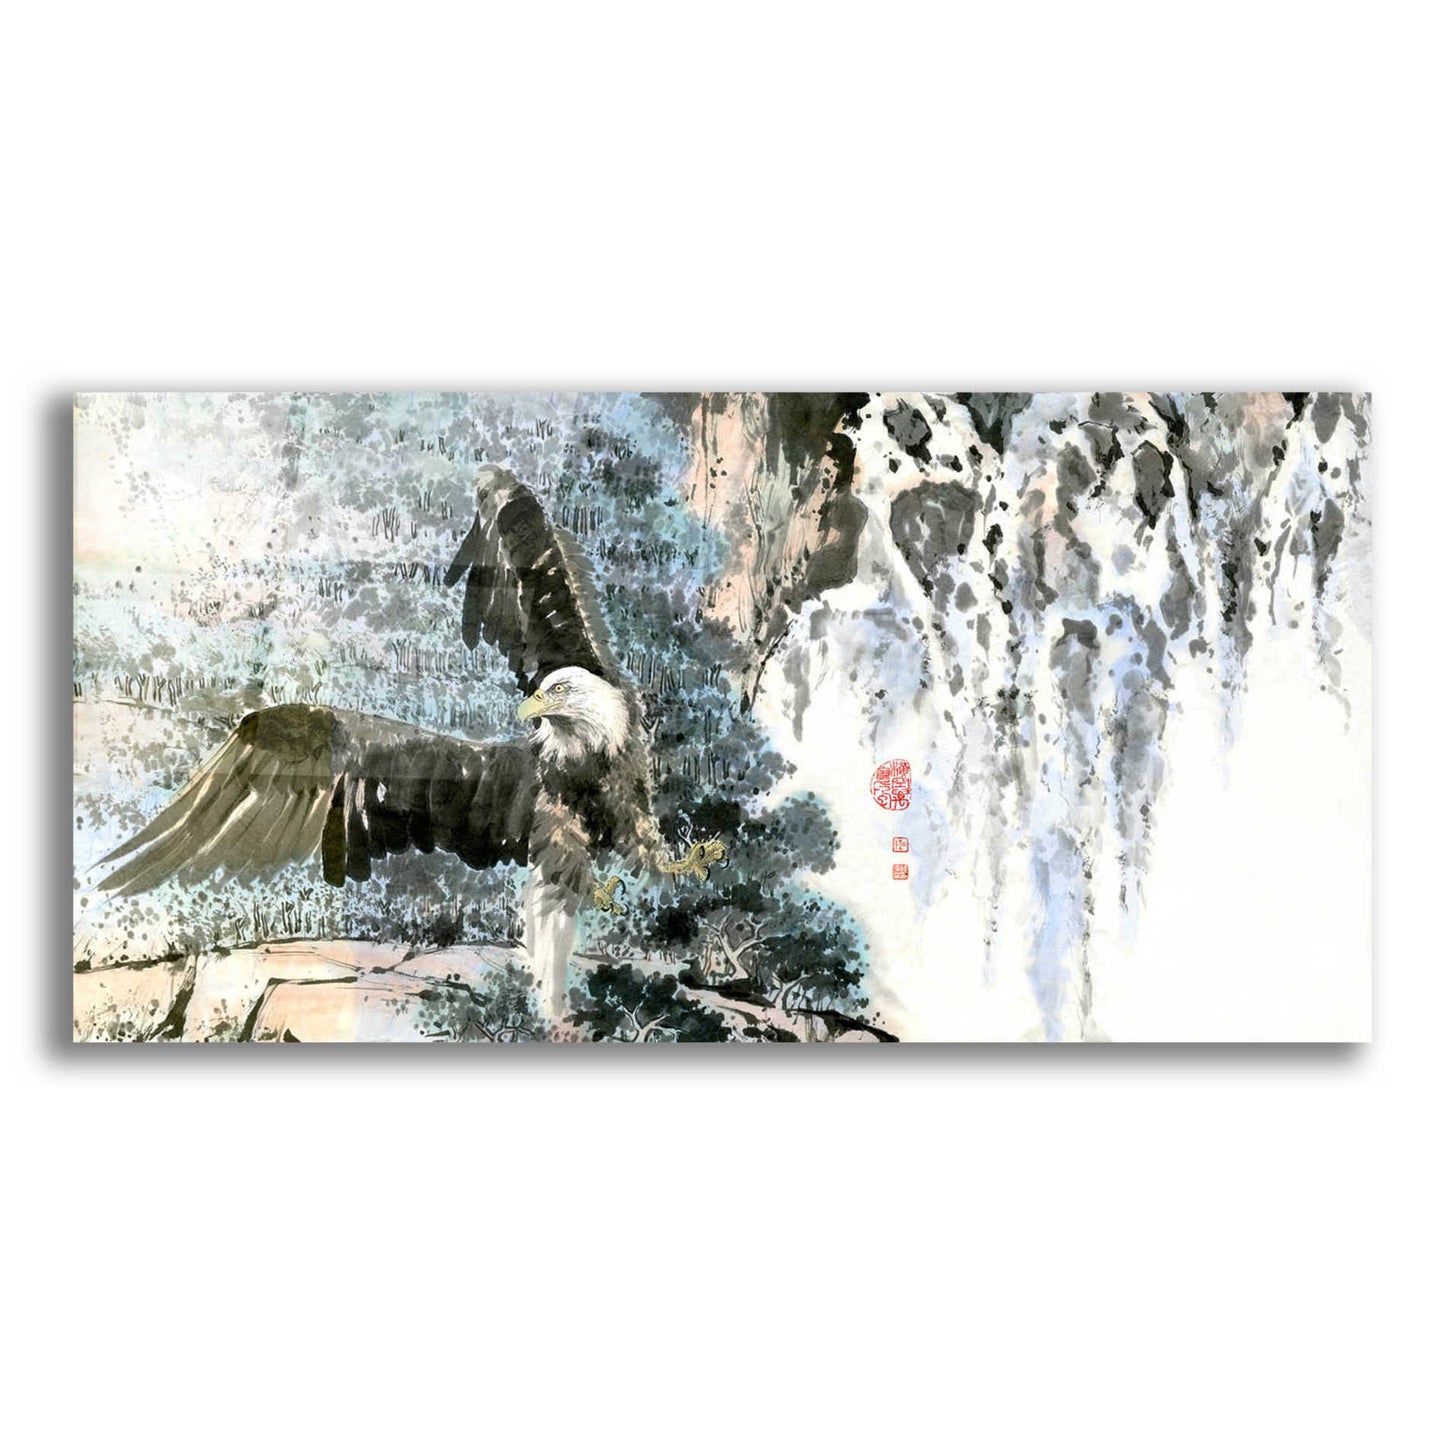 Epic Art 'Bald Eagle Over Cascading Waterfalls' by River Han, Acrylic Glass Wall Art